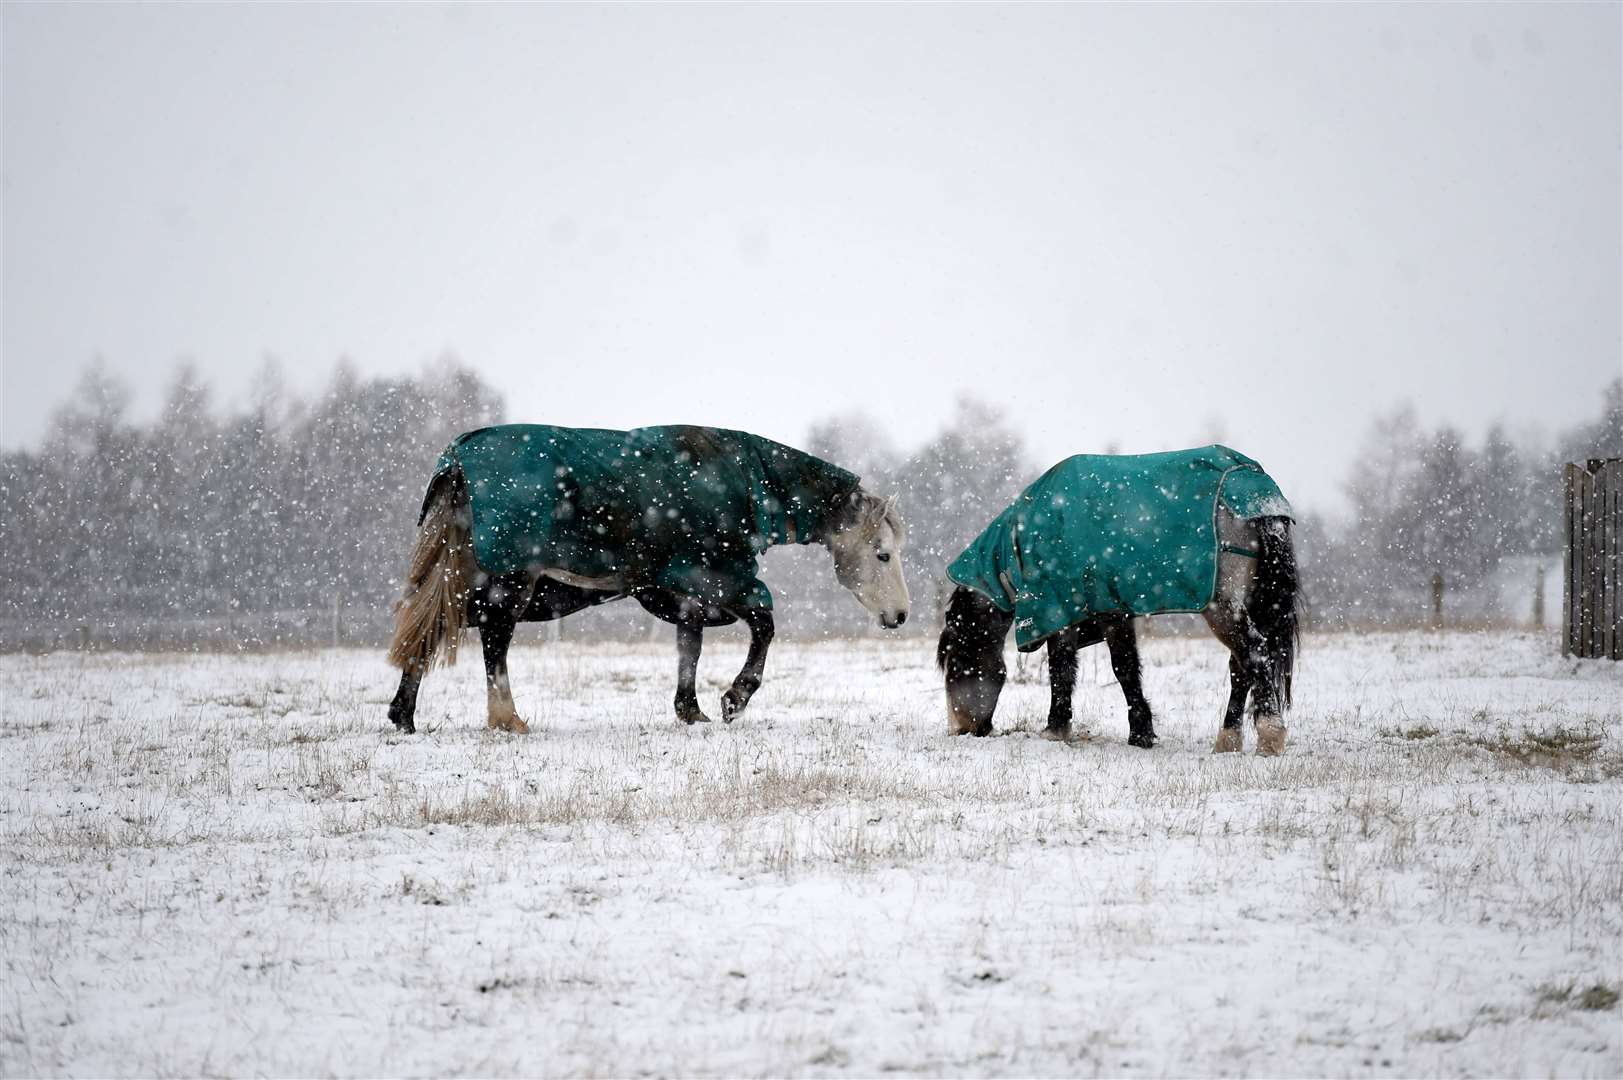 With their coats on these horses weren't too bothered by the snow showers.